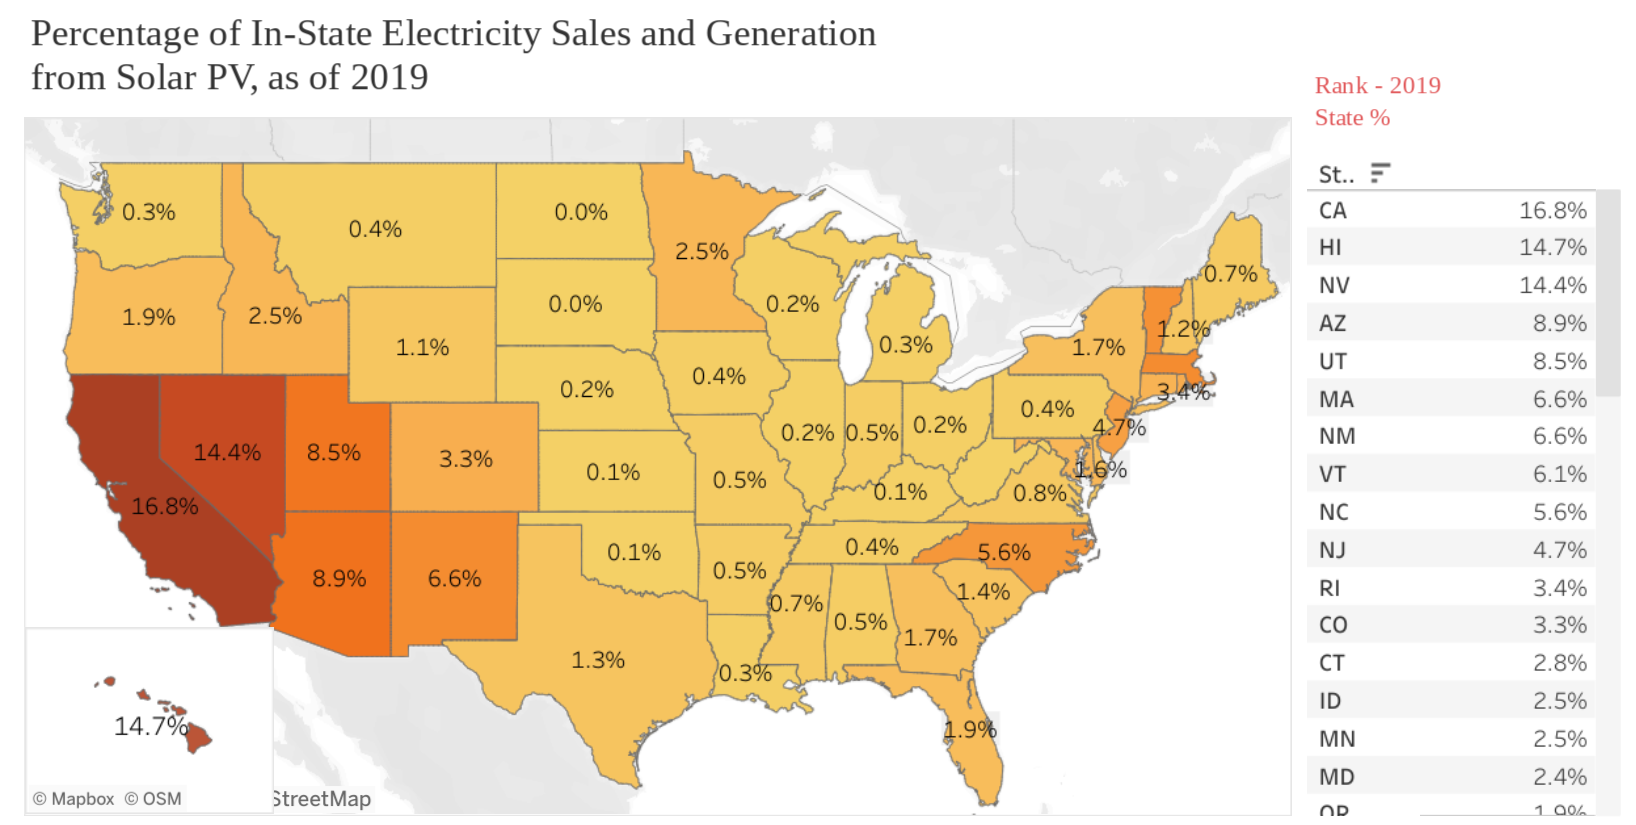 Map of US demonstrates percentage of in-state electricity sales and generation from Solar PV. CA highest at 16.8%, then HI 14.7%, NV 14.4, AZ 8.9%, UT 8.5%, MA 6.6%, NM 6.6%, VT 6.1%, NC 5.6%, NJ 4.7%, RI 3.4% 